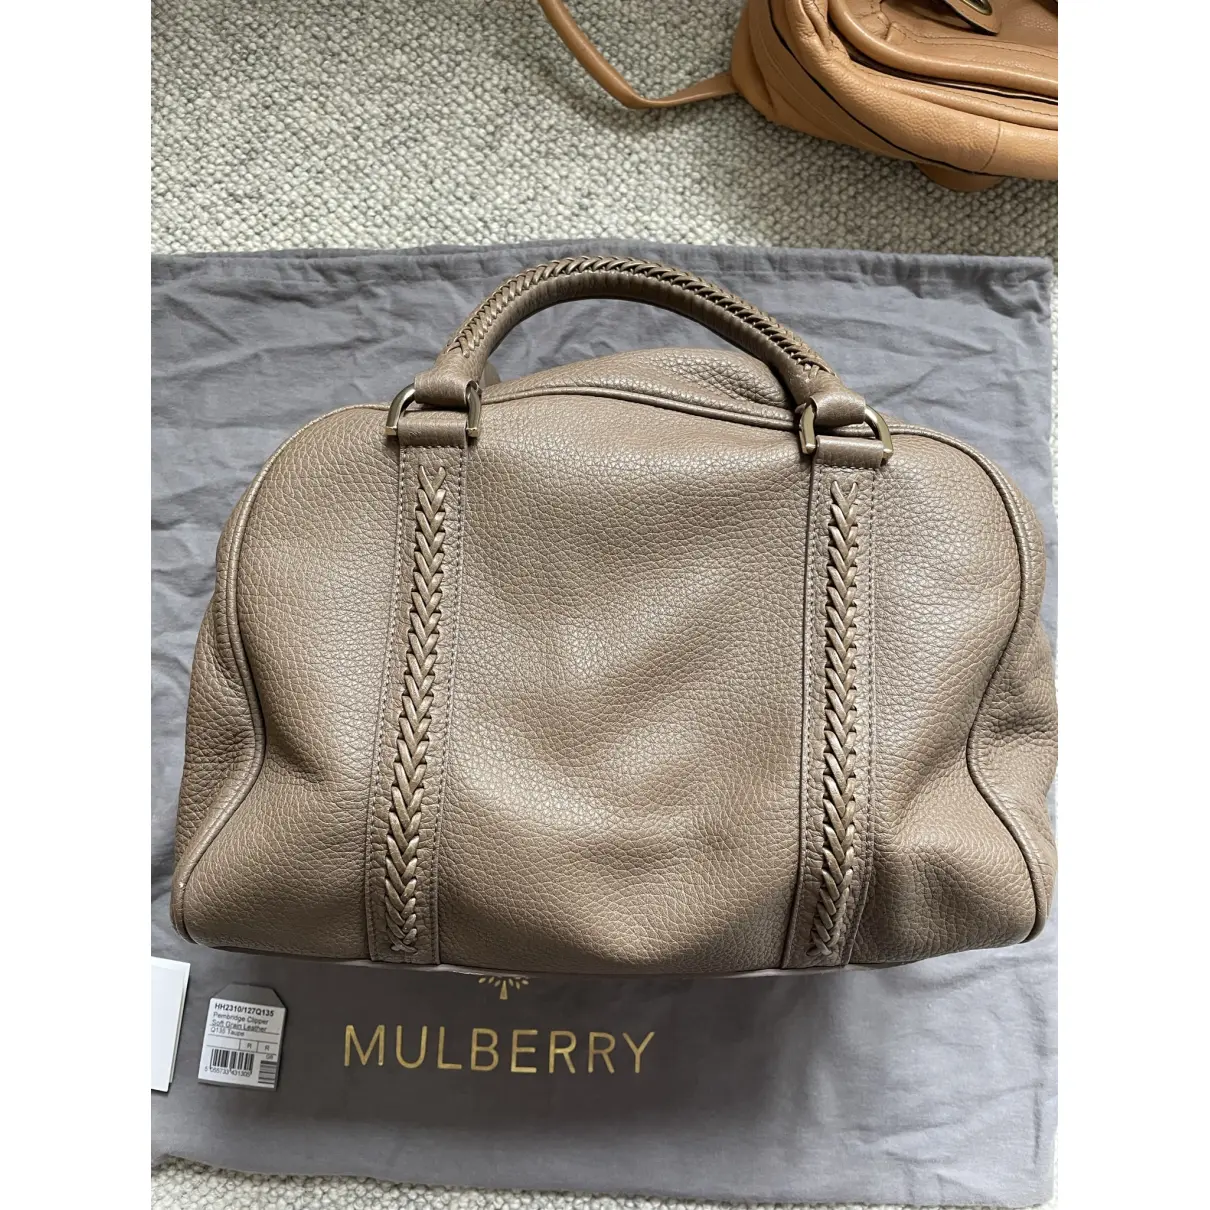 Buy Mulberry Leather 24h bag online